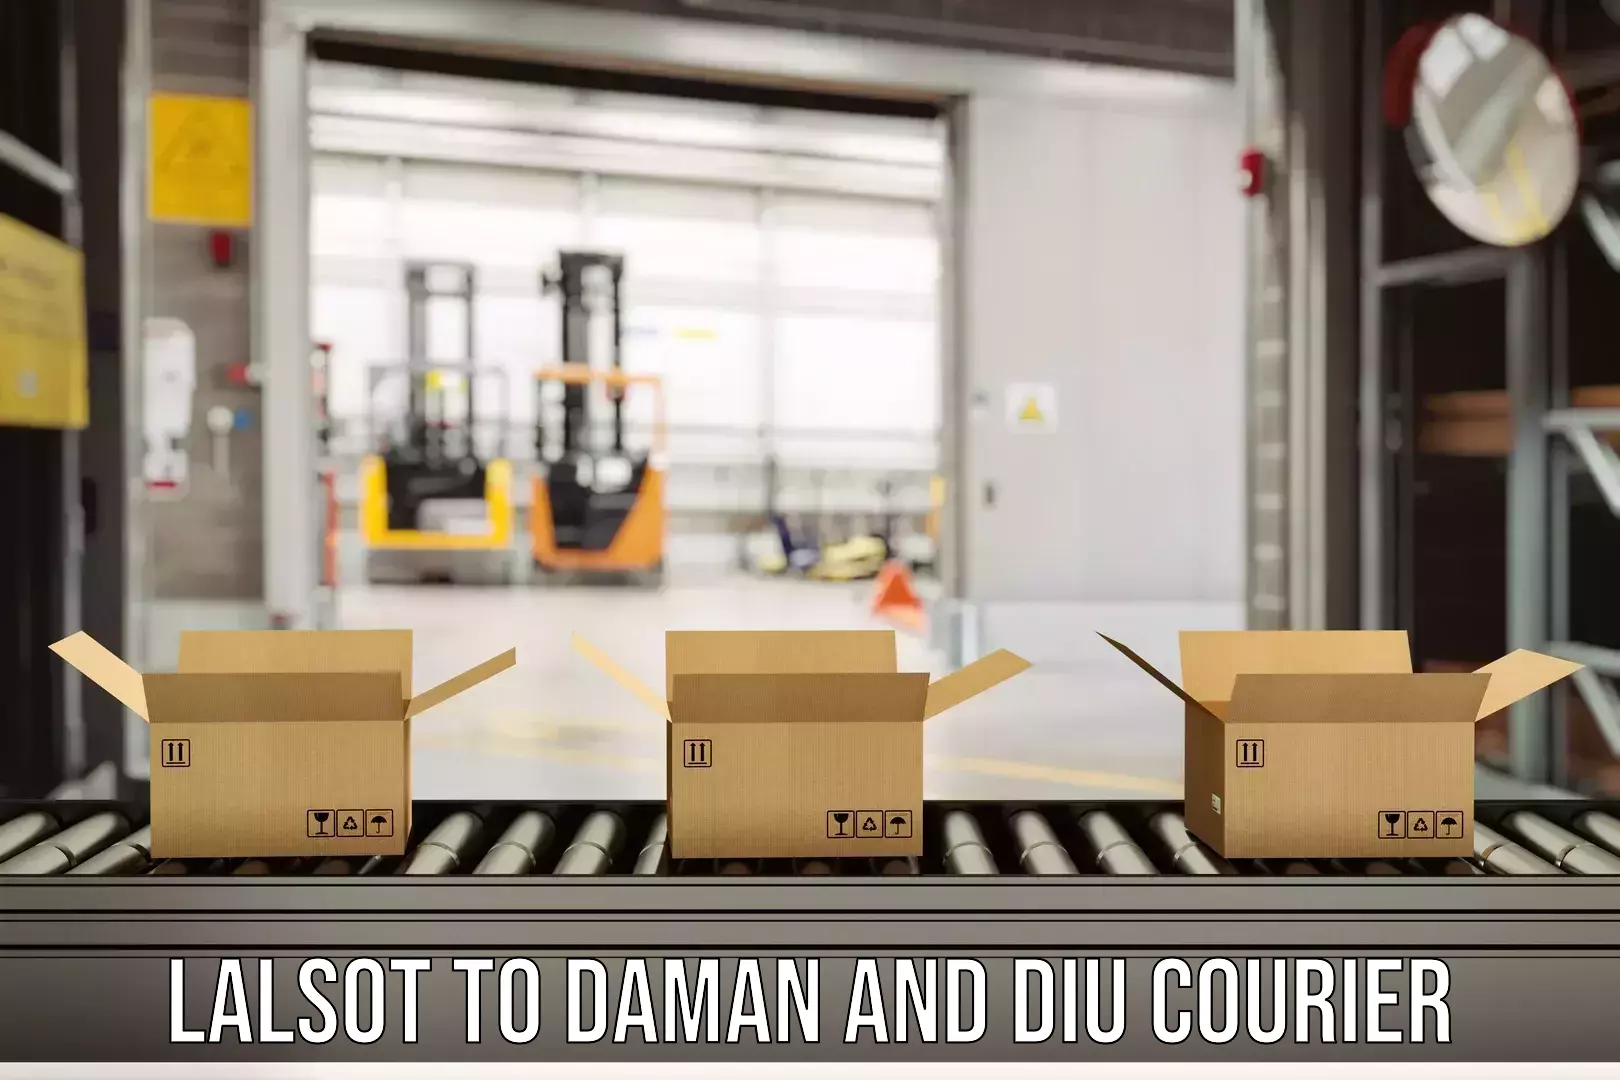 Full-service courier options Lalsot to Daman and Diu